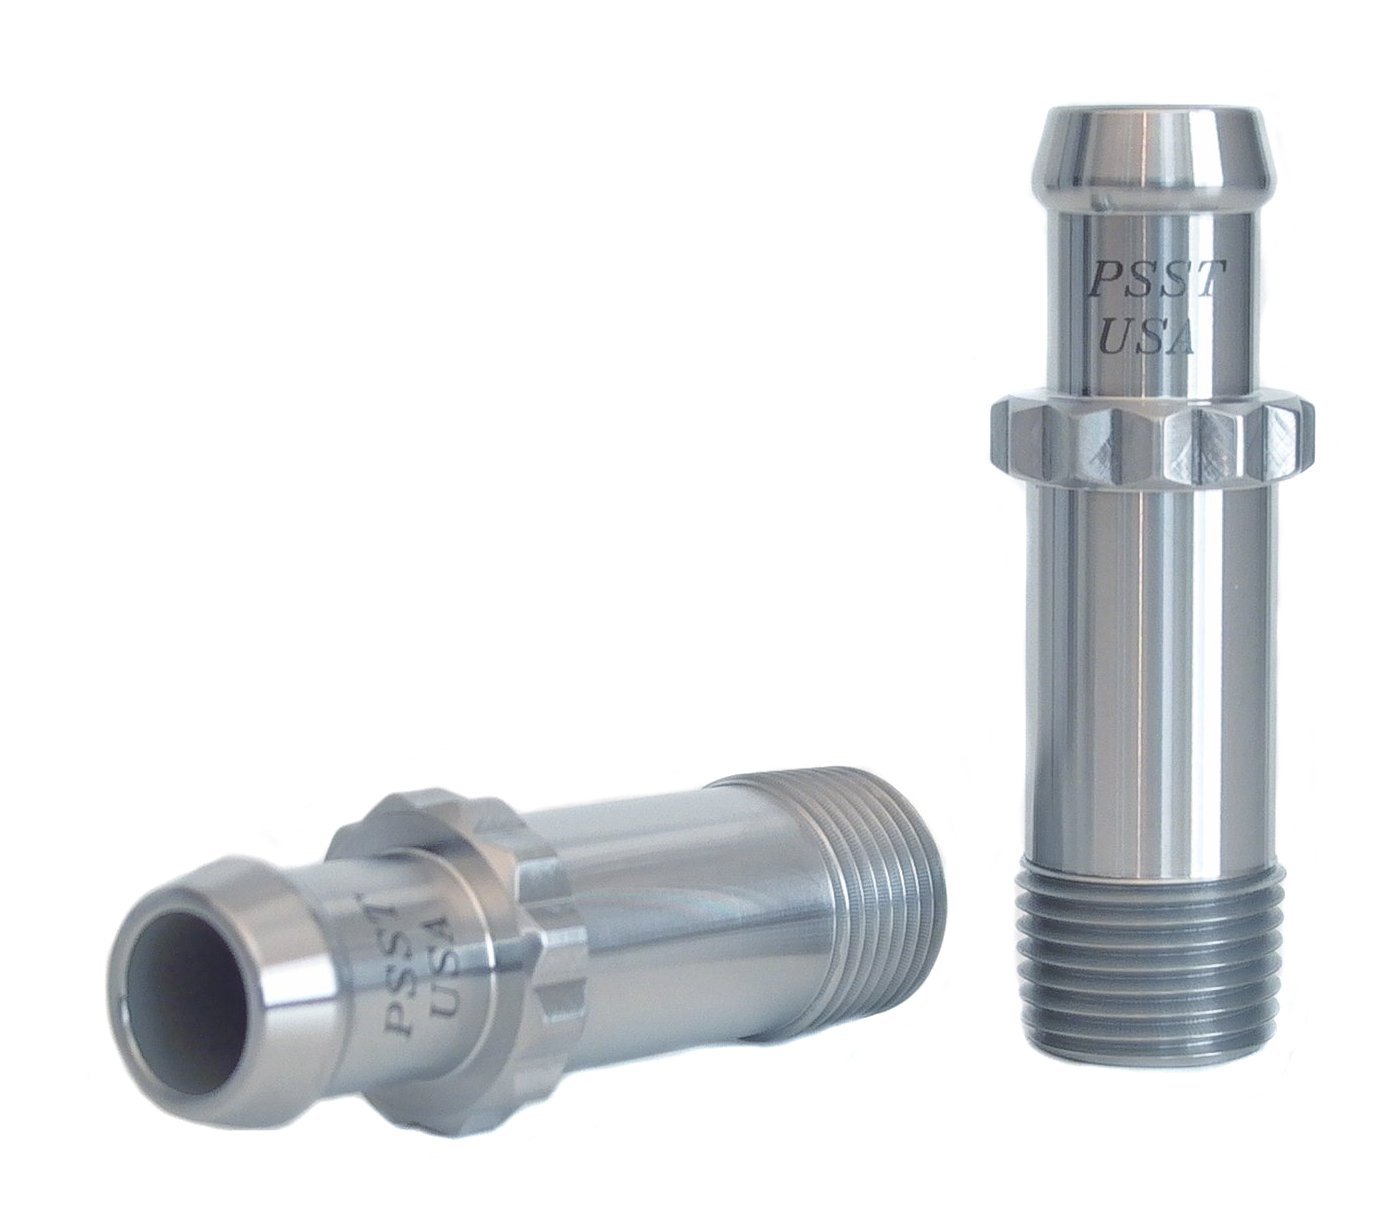 Heater Hose Fitting, Straight, 1/2 in. NPT x 5/8 in. Hose Barb, 2 7/8 in. Length [Natural Finish]